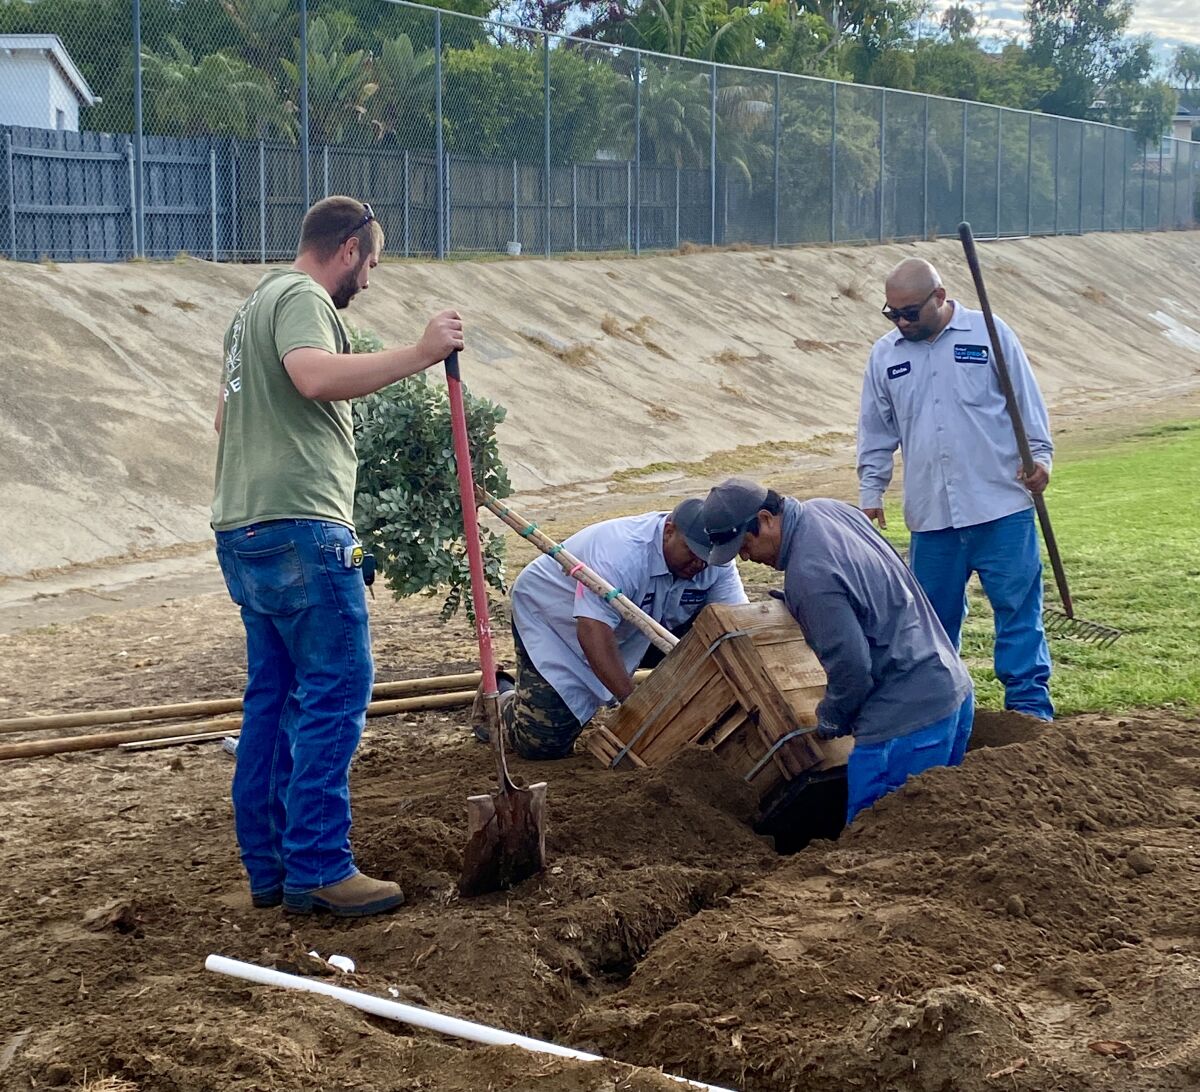 City staff worked to plant two young New Zealand Christmas trees, along with new irrigation lines, at Bird Rock Elementary 